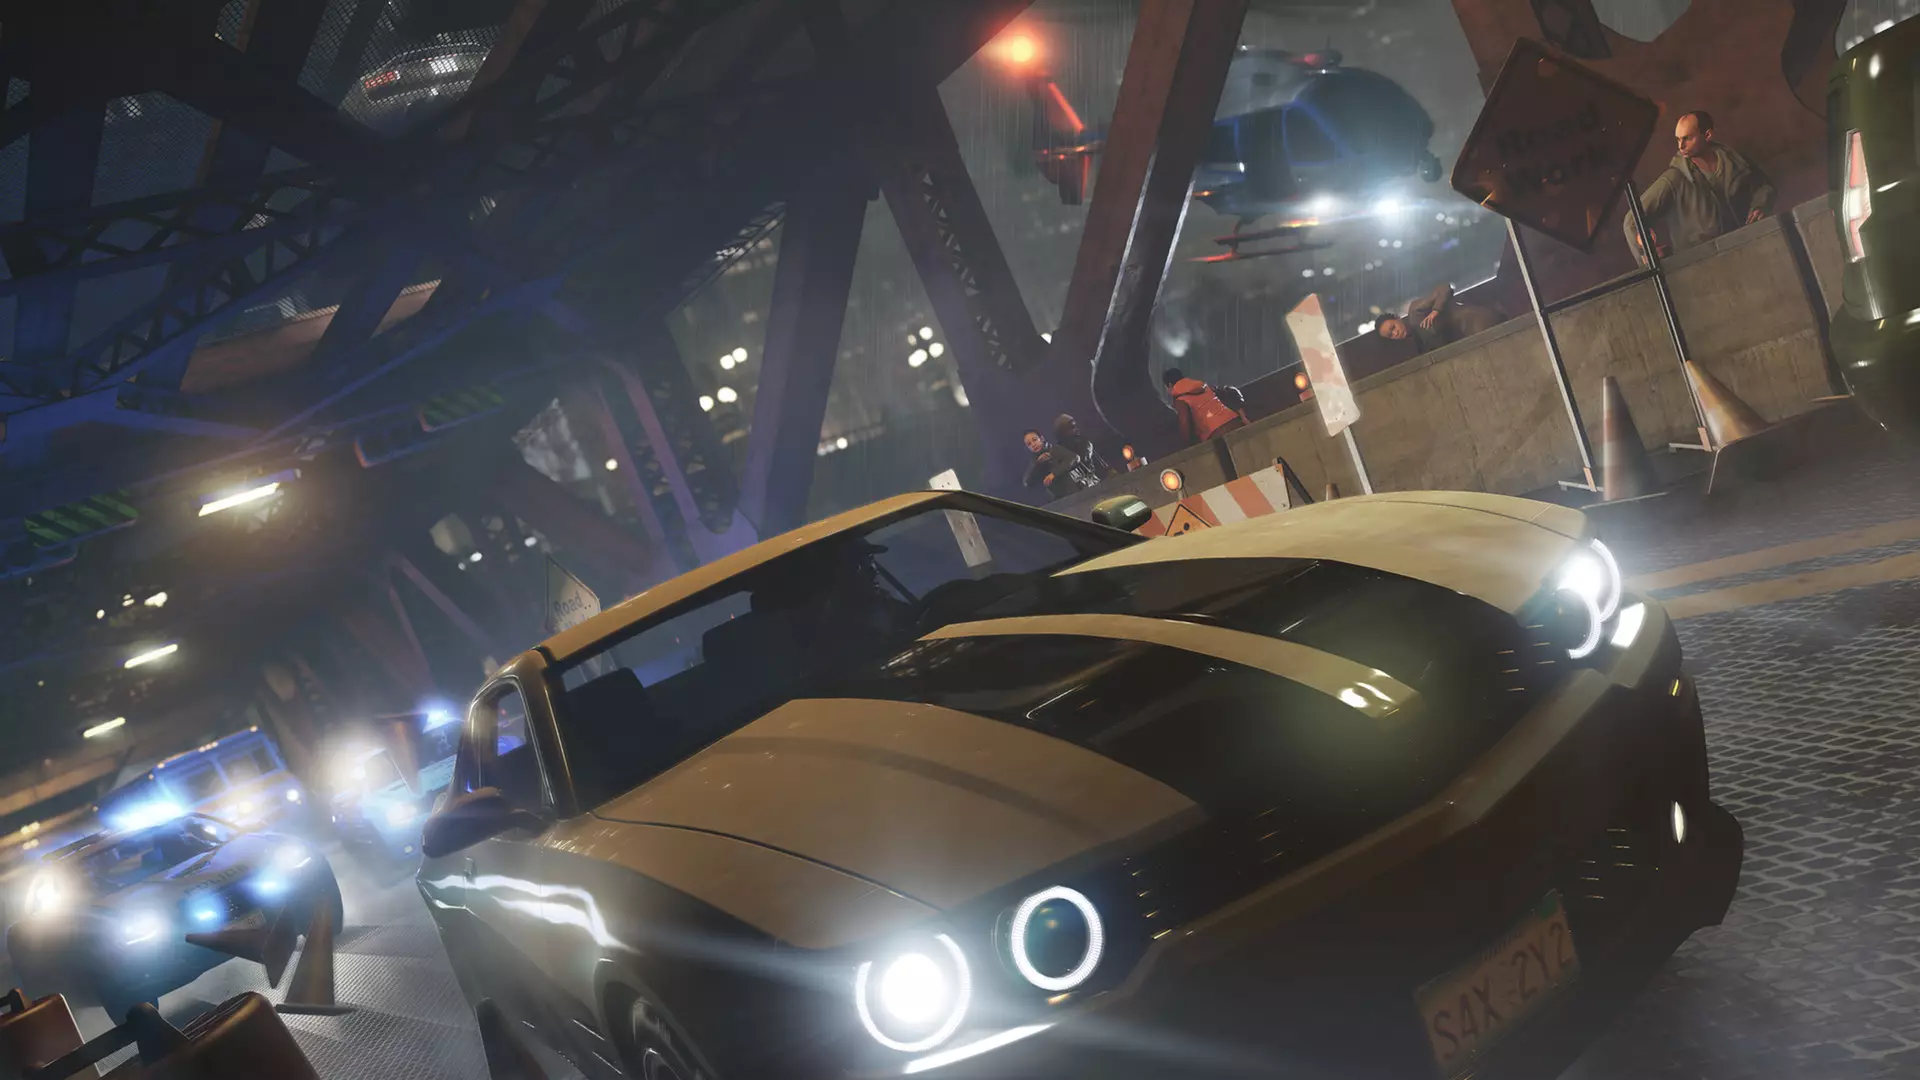 Picking an eye-catching car isn't the best tactic in Watch Dogs /